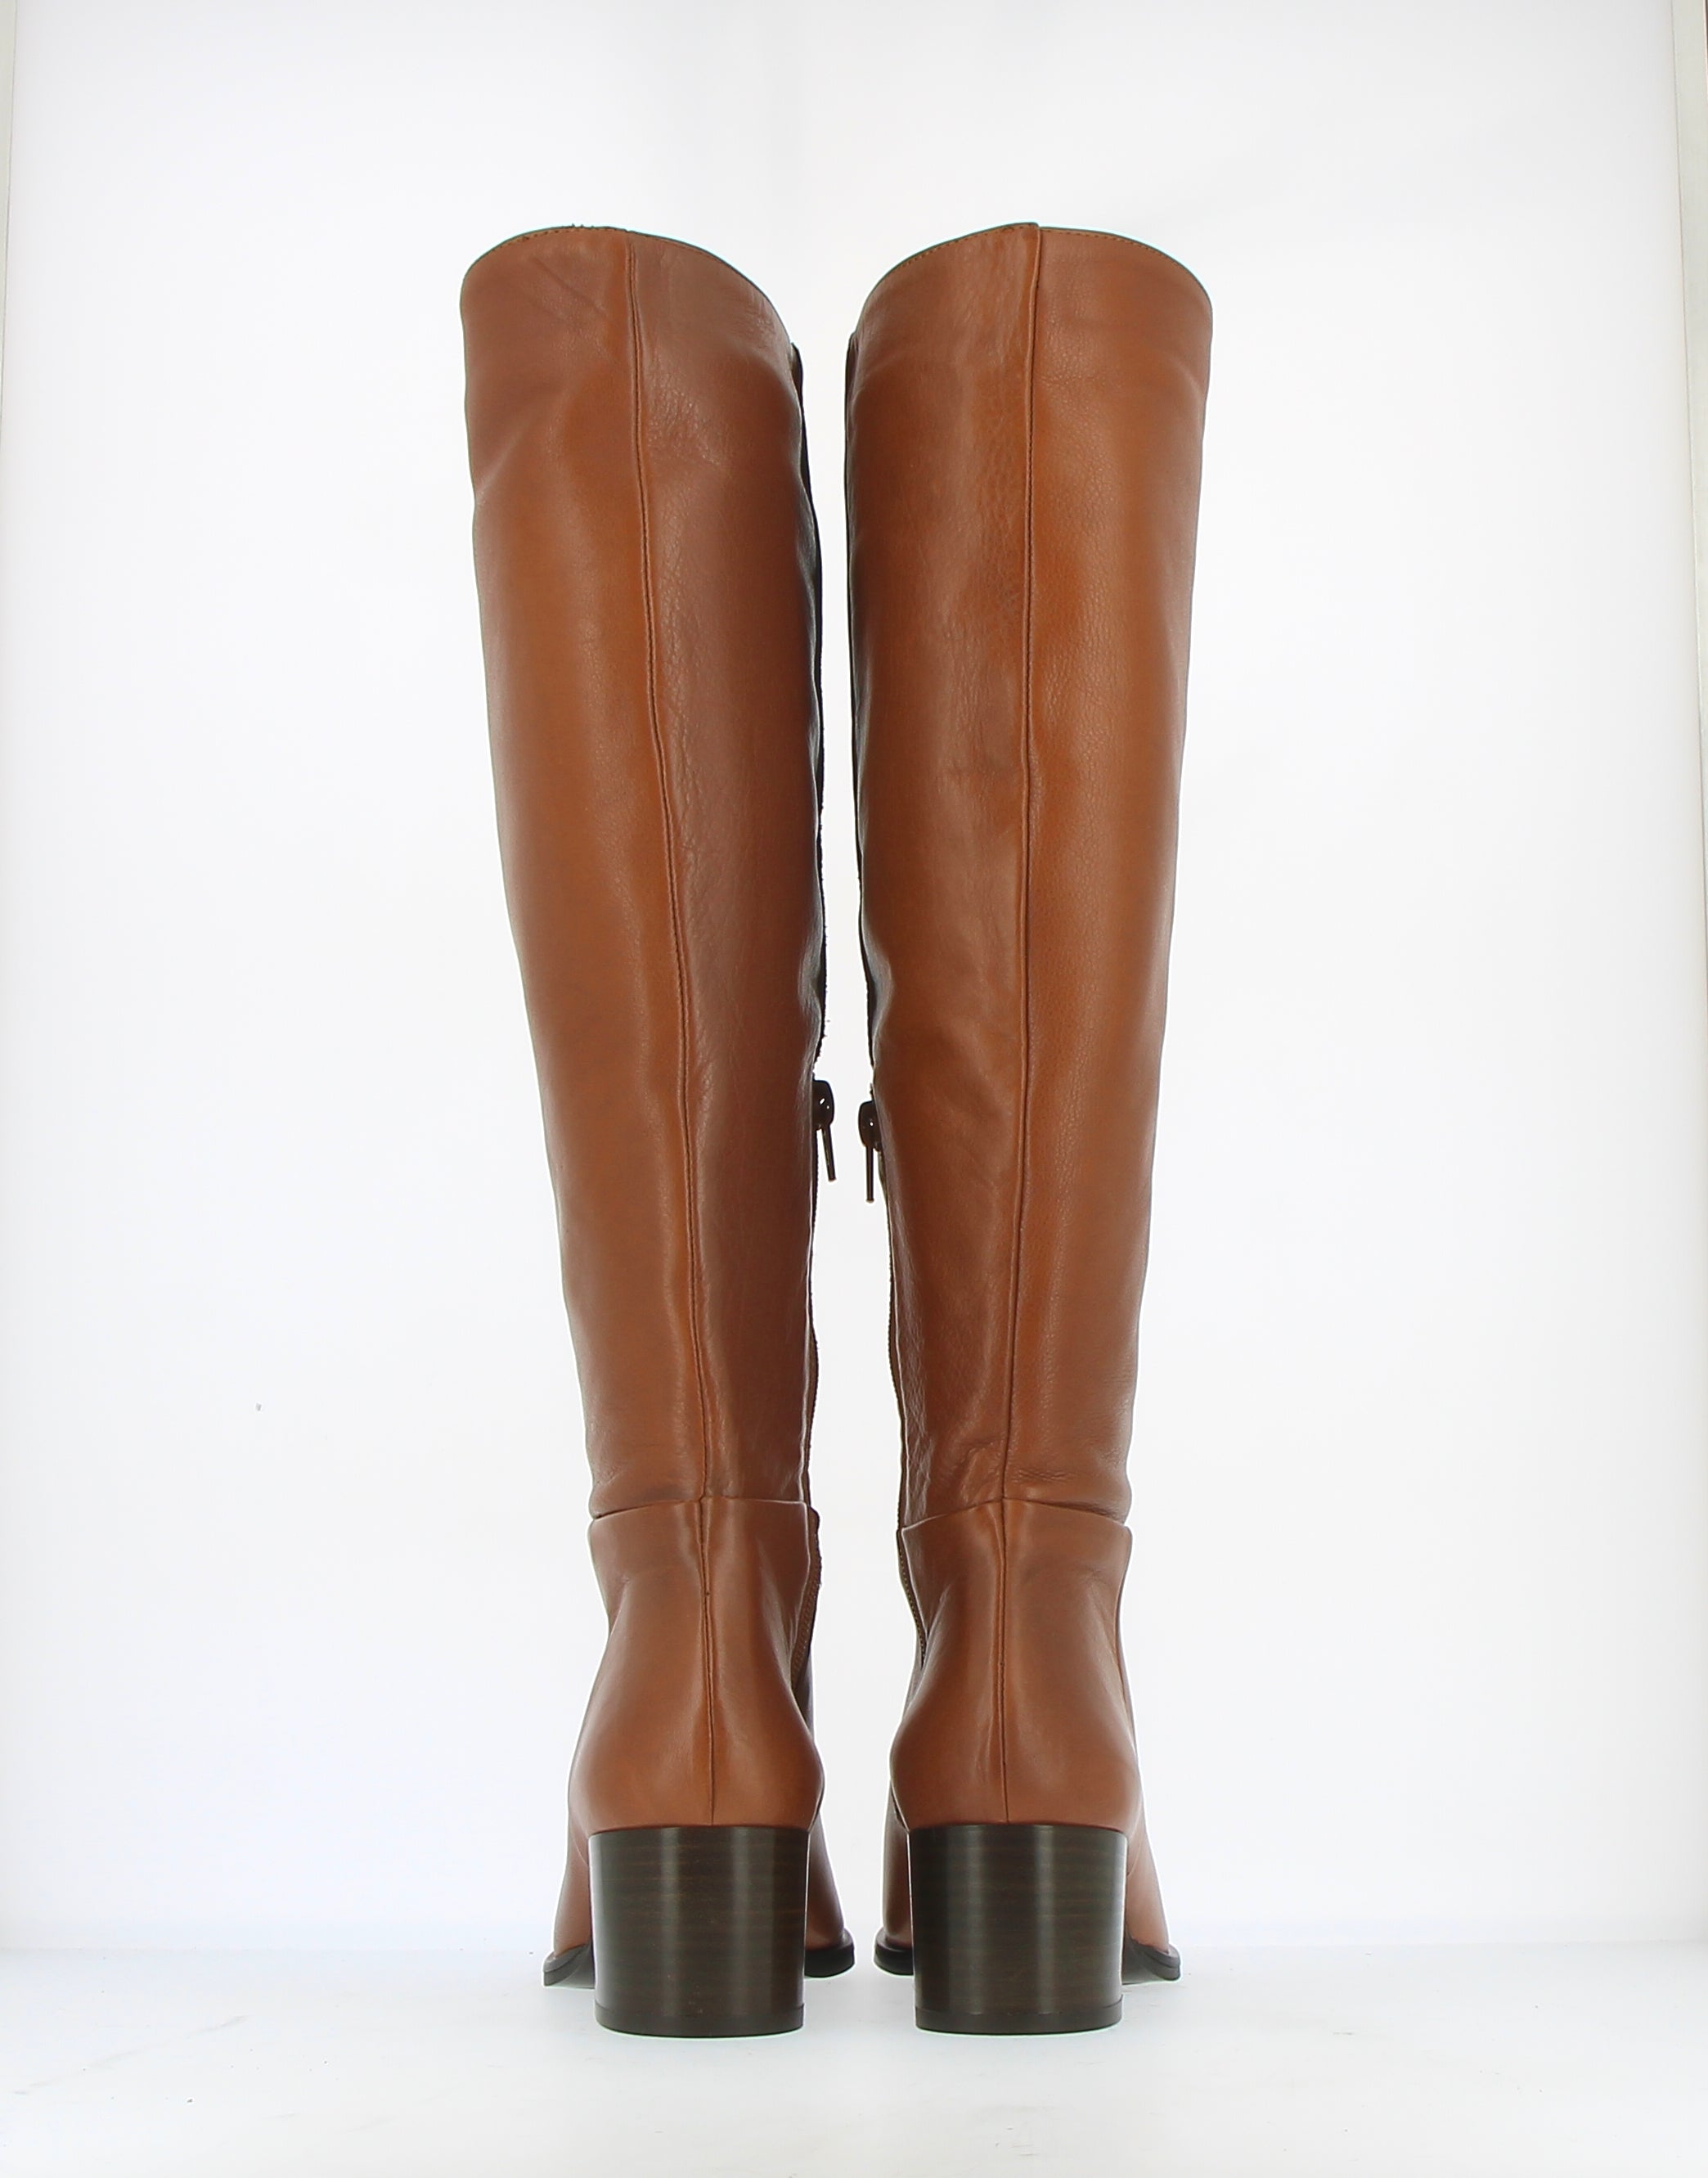 Caramel leather high boot